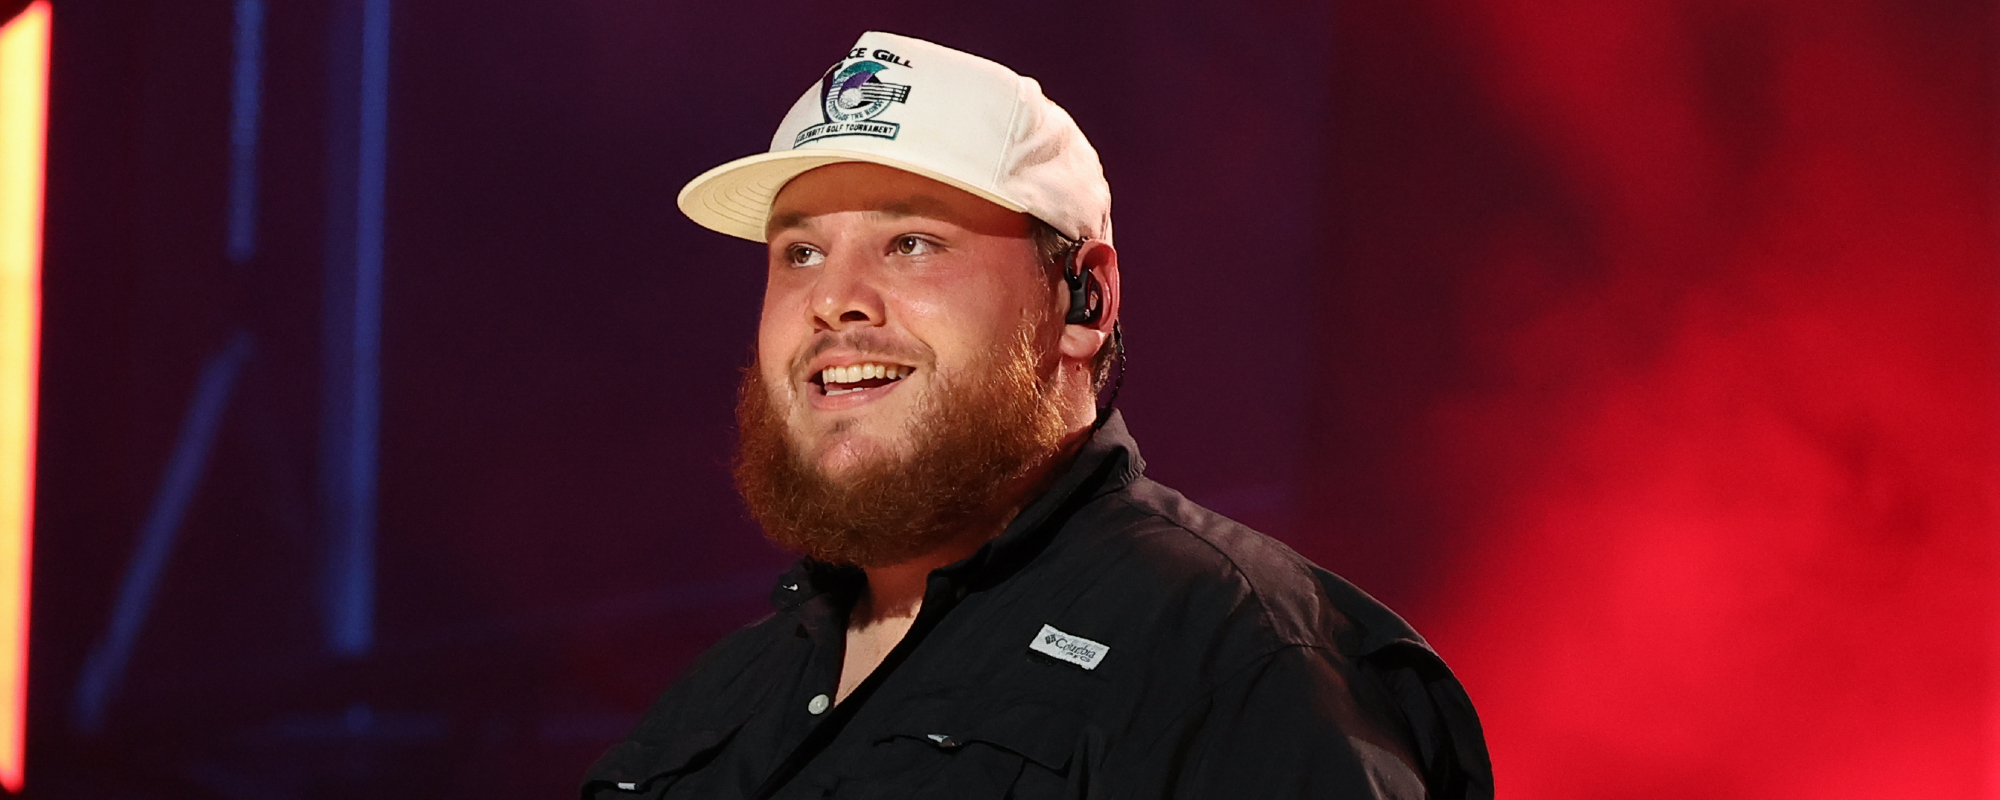 Taylor Swift Unknowingly Photobombs Luke Combs & Wife in Hilarious GRAMMYs Moment